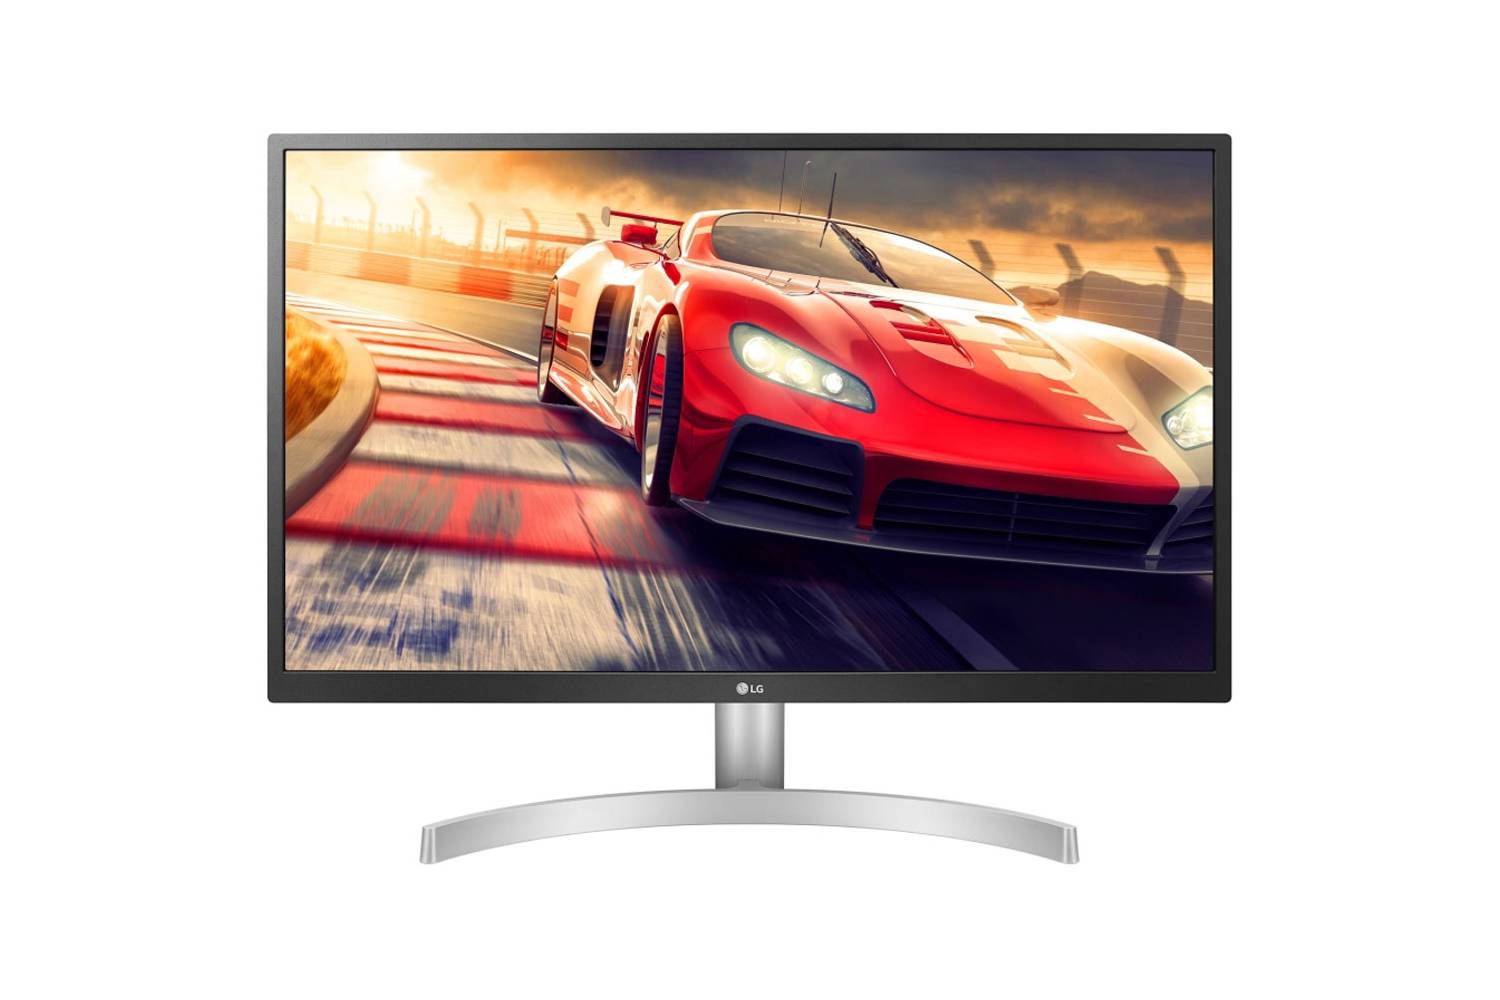 LG 27 inch Class 4K UHD IPS LED Monitor with HDR 10 (27'' Diagonal)